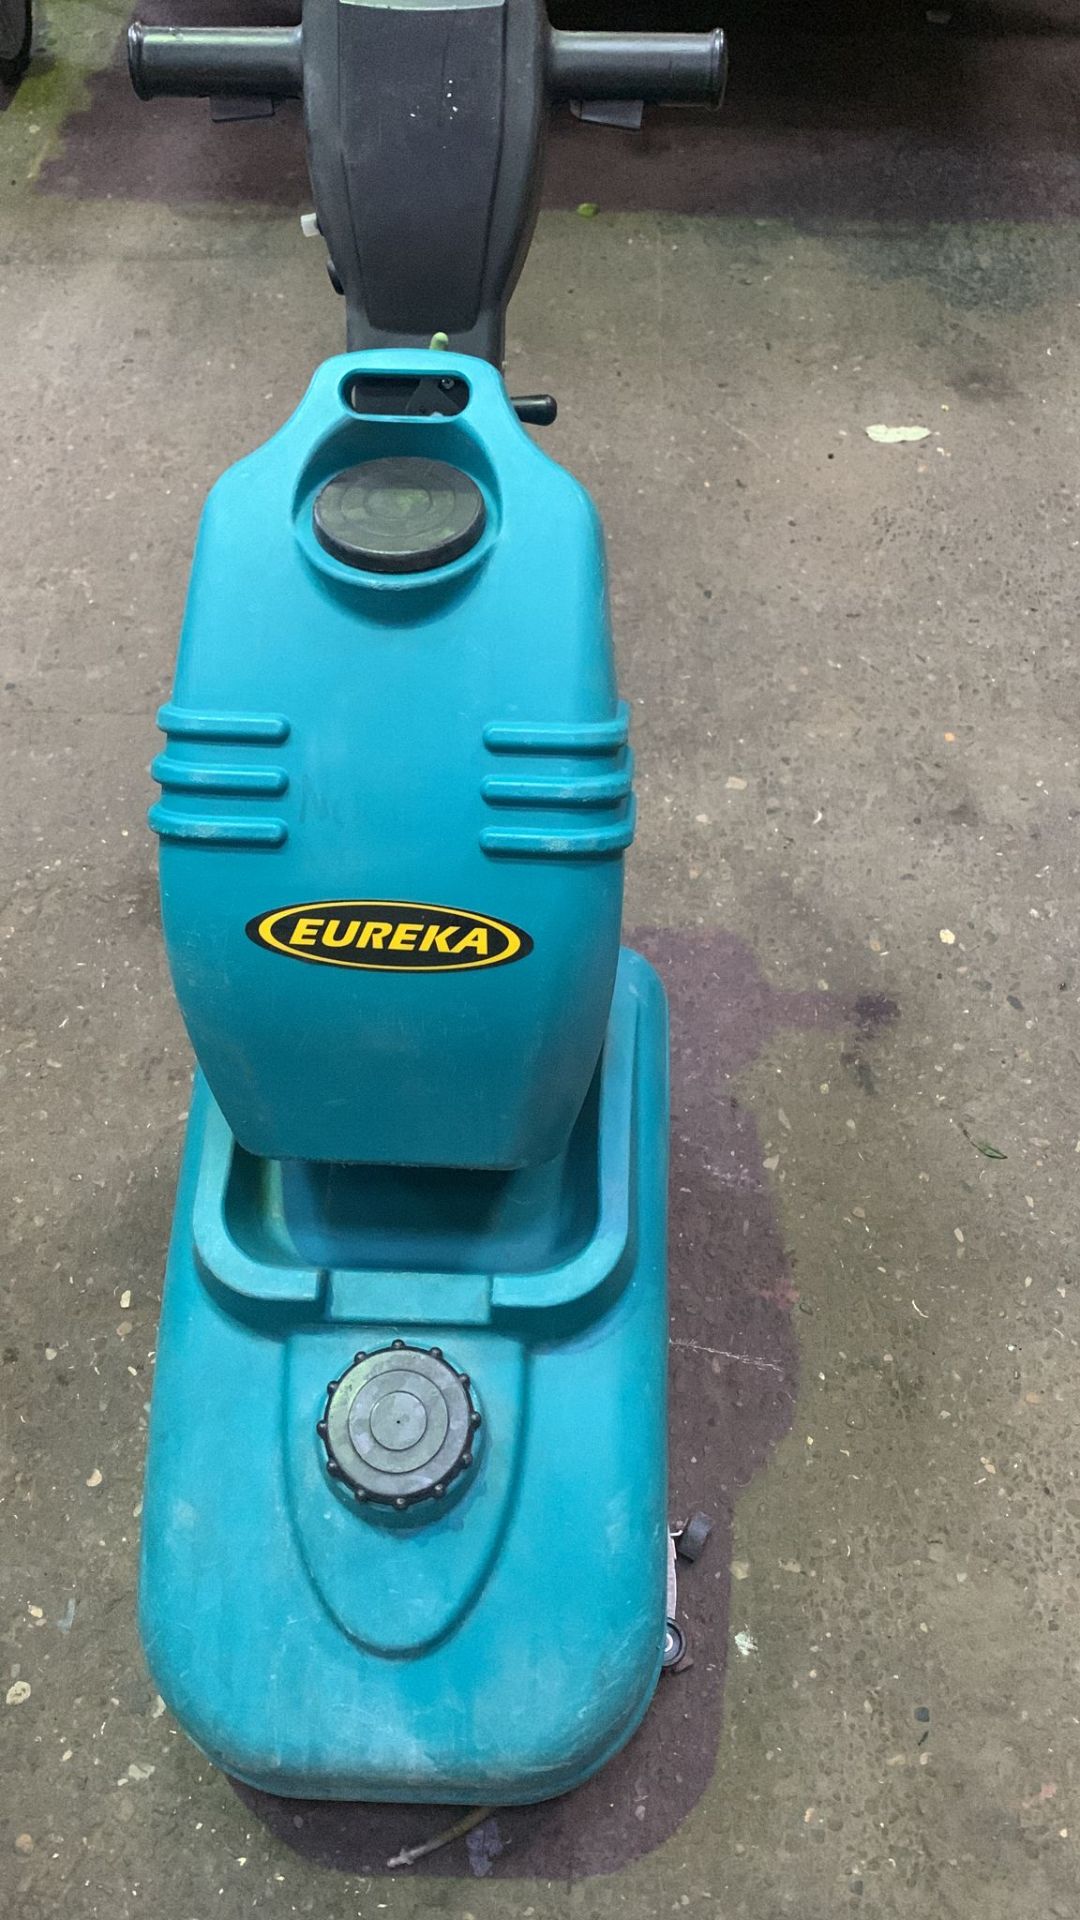 EUREKA E36 BATTERY SCRUBBER DRIER FLOOR CLEANING MACHINE SPARES AND REPAIRS SOME PARTS MISSING - Bild 2 aus 3